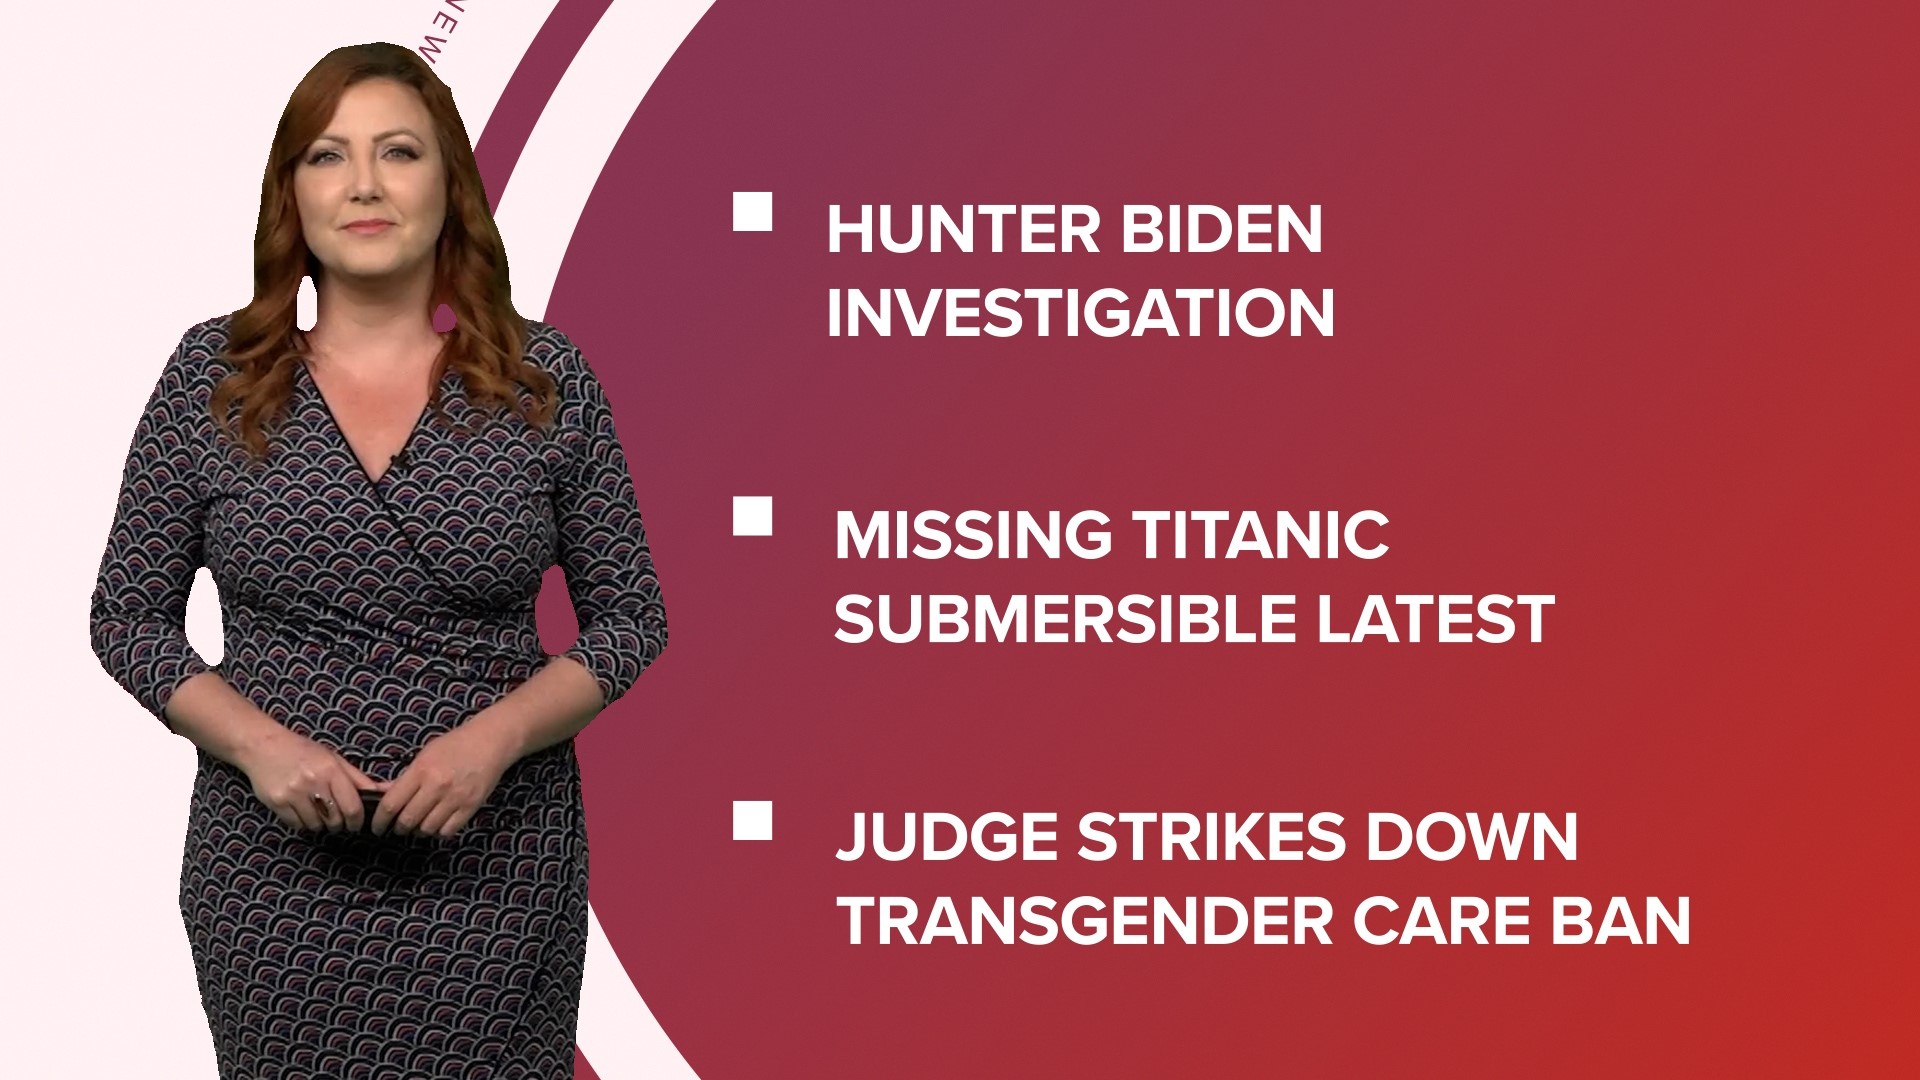 A look at what is happening in the news from Hunter Biden expected to plead guilty in tax investigation to the missing submersible search and Texas heat wave.